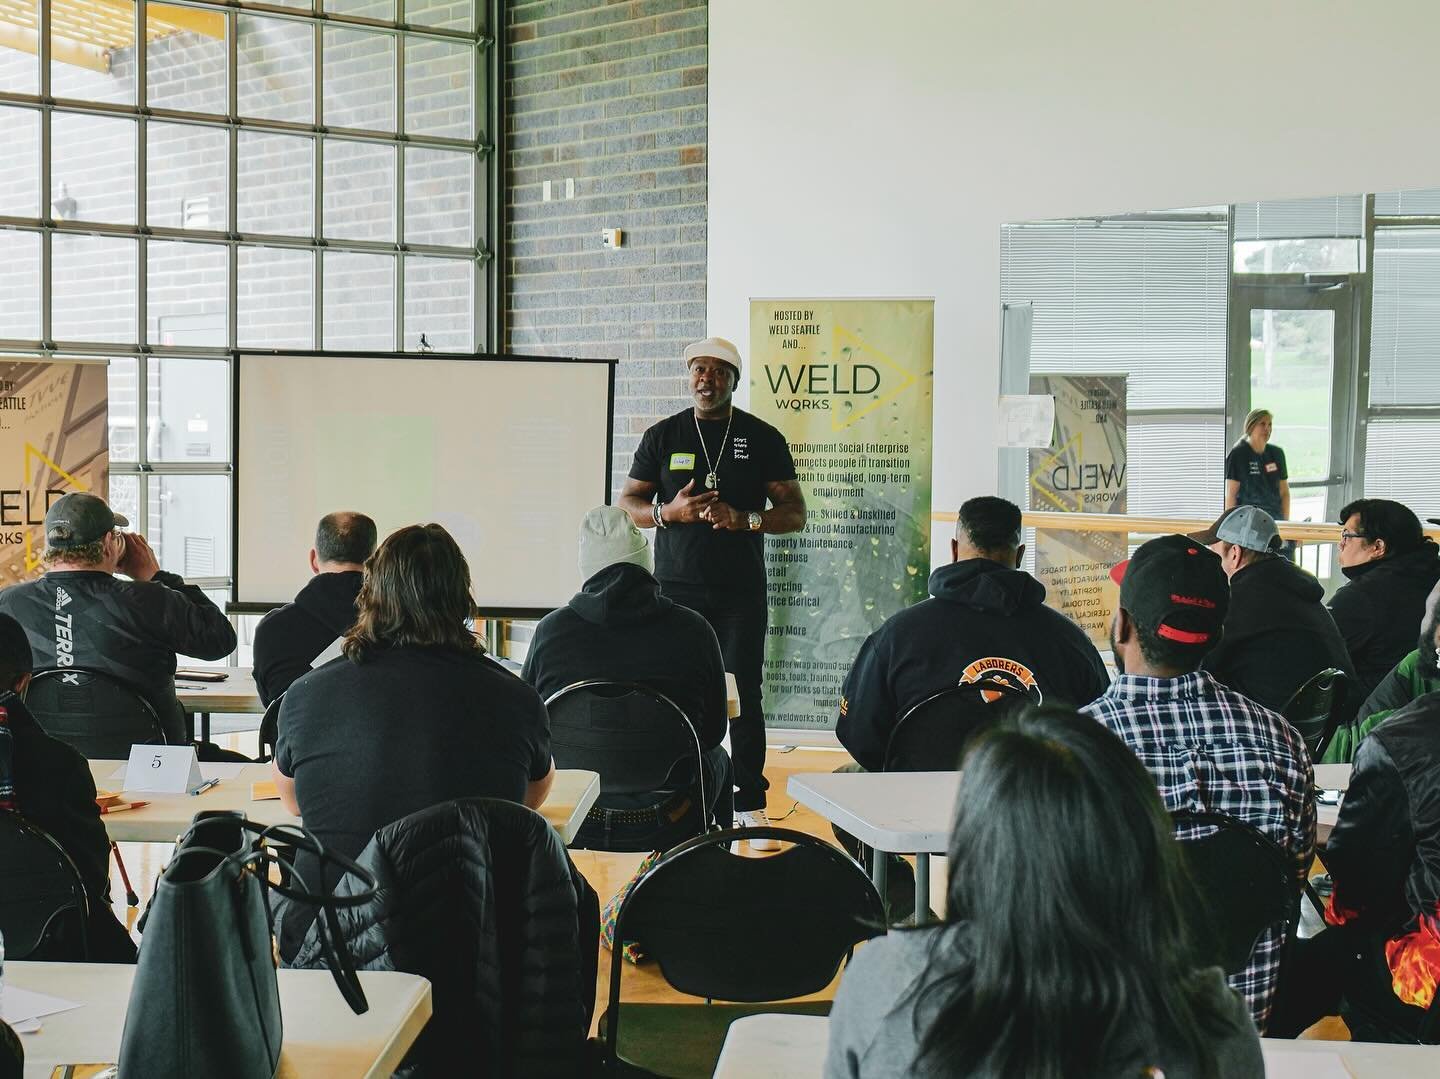 This weekend at Garfield Community Center, our latest &ldquo;Walk It Out&rdquo; event on Housing unfolded with heartfelt stories and vibrant discussions. A huge shout-out to our community members, staff, and those involved in Weld&rsquo;s programs wh